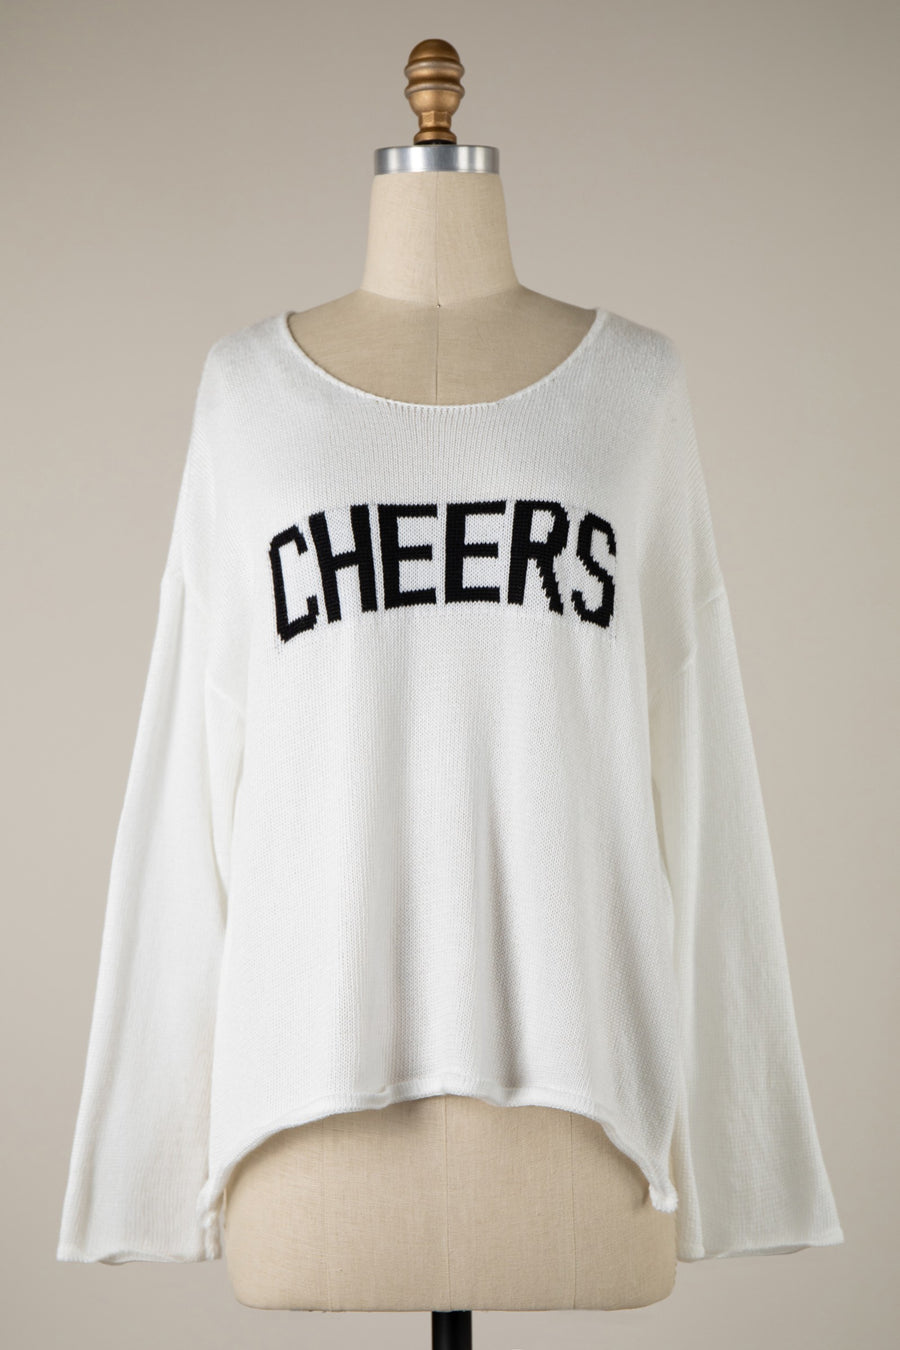 Featuring a light weight sweater with the saying "Cheers" on the front and a wide neckline.